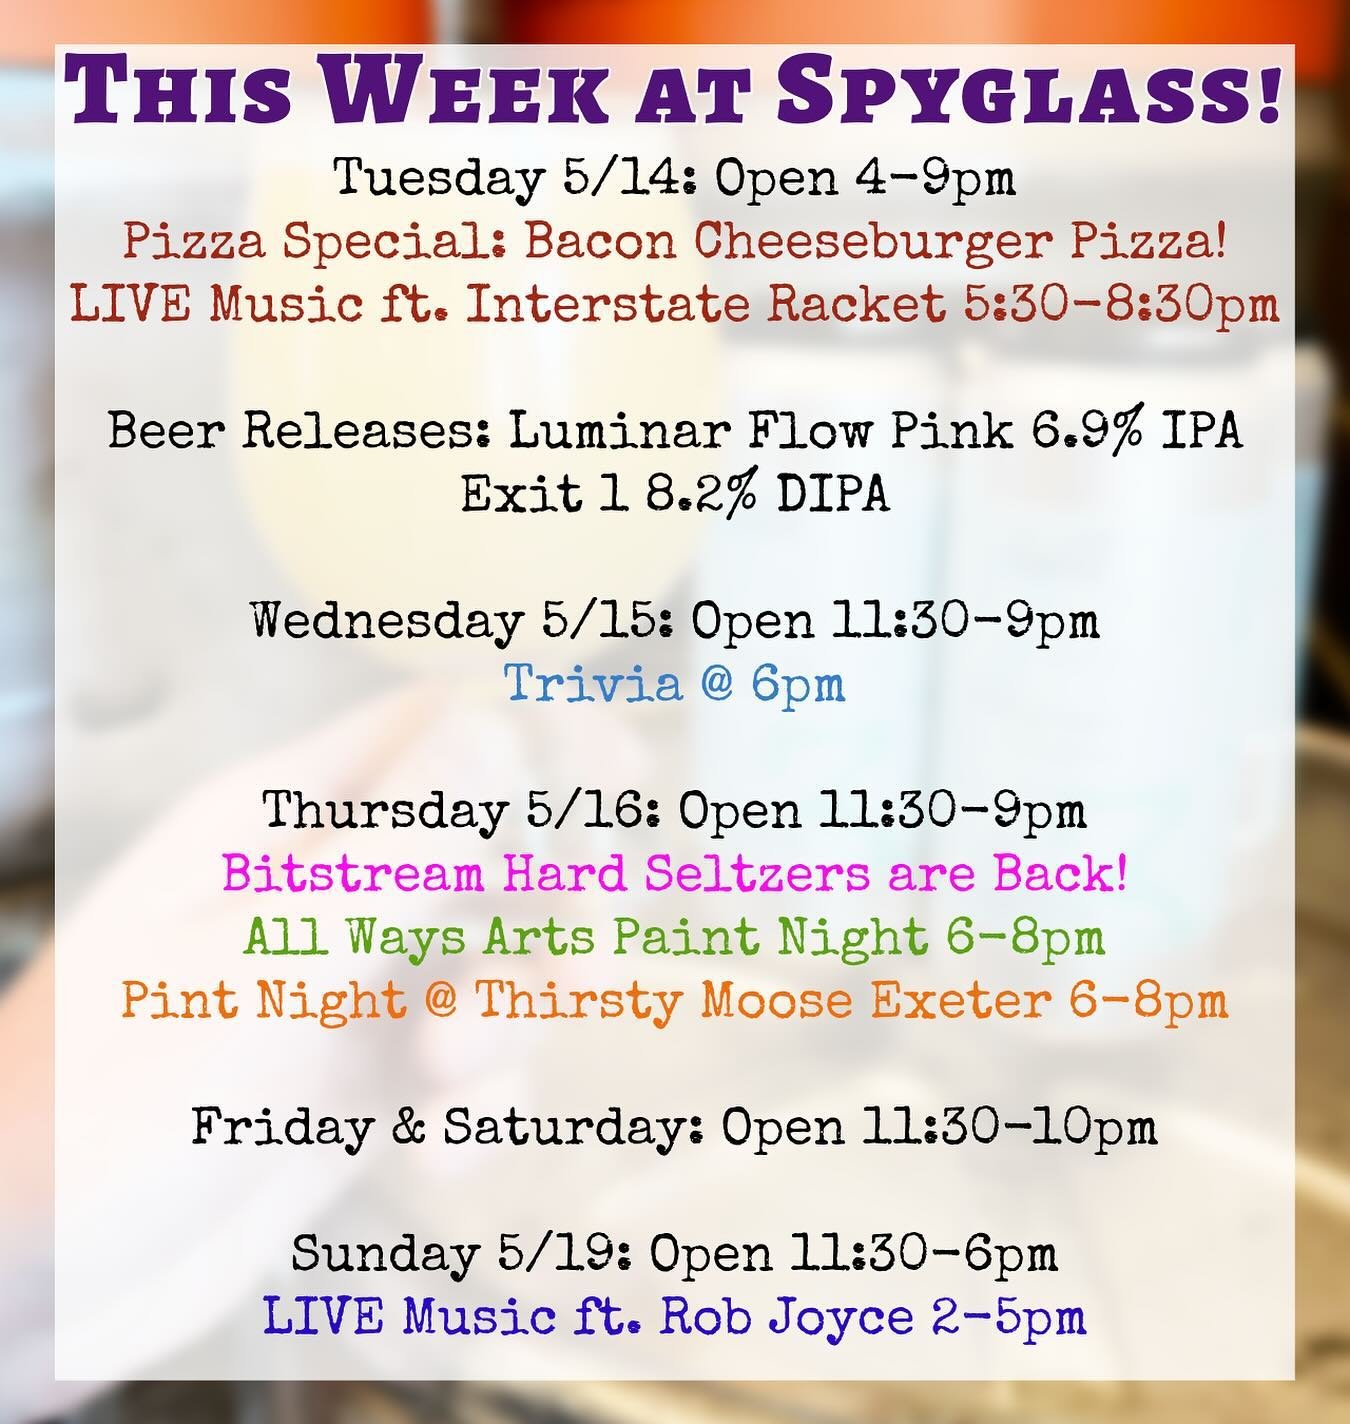 This Week at Spyglass!

Tuesday 5/14 Open 4-9pm 
🍕Chef Special Pizza - Bacon Cheeseburger Pizza - Bacon, ground beef, pizza &amp; American cheese, burger sauce, red onion, pickles, tomato, &amp; toasted sesame seeds.

LIVE Music with Interstate Rack